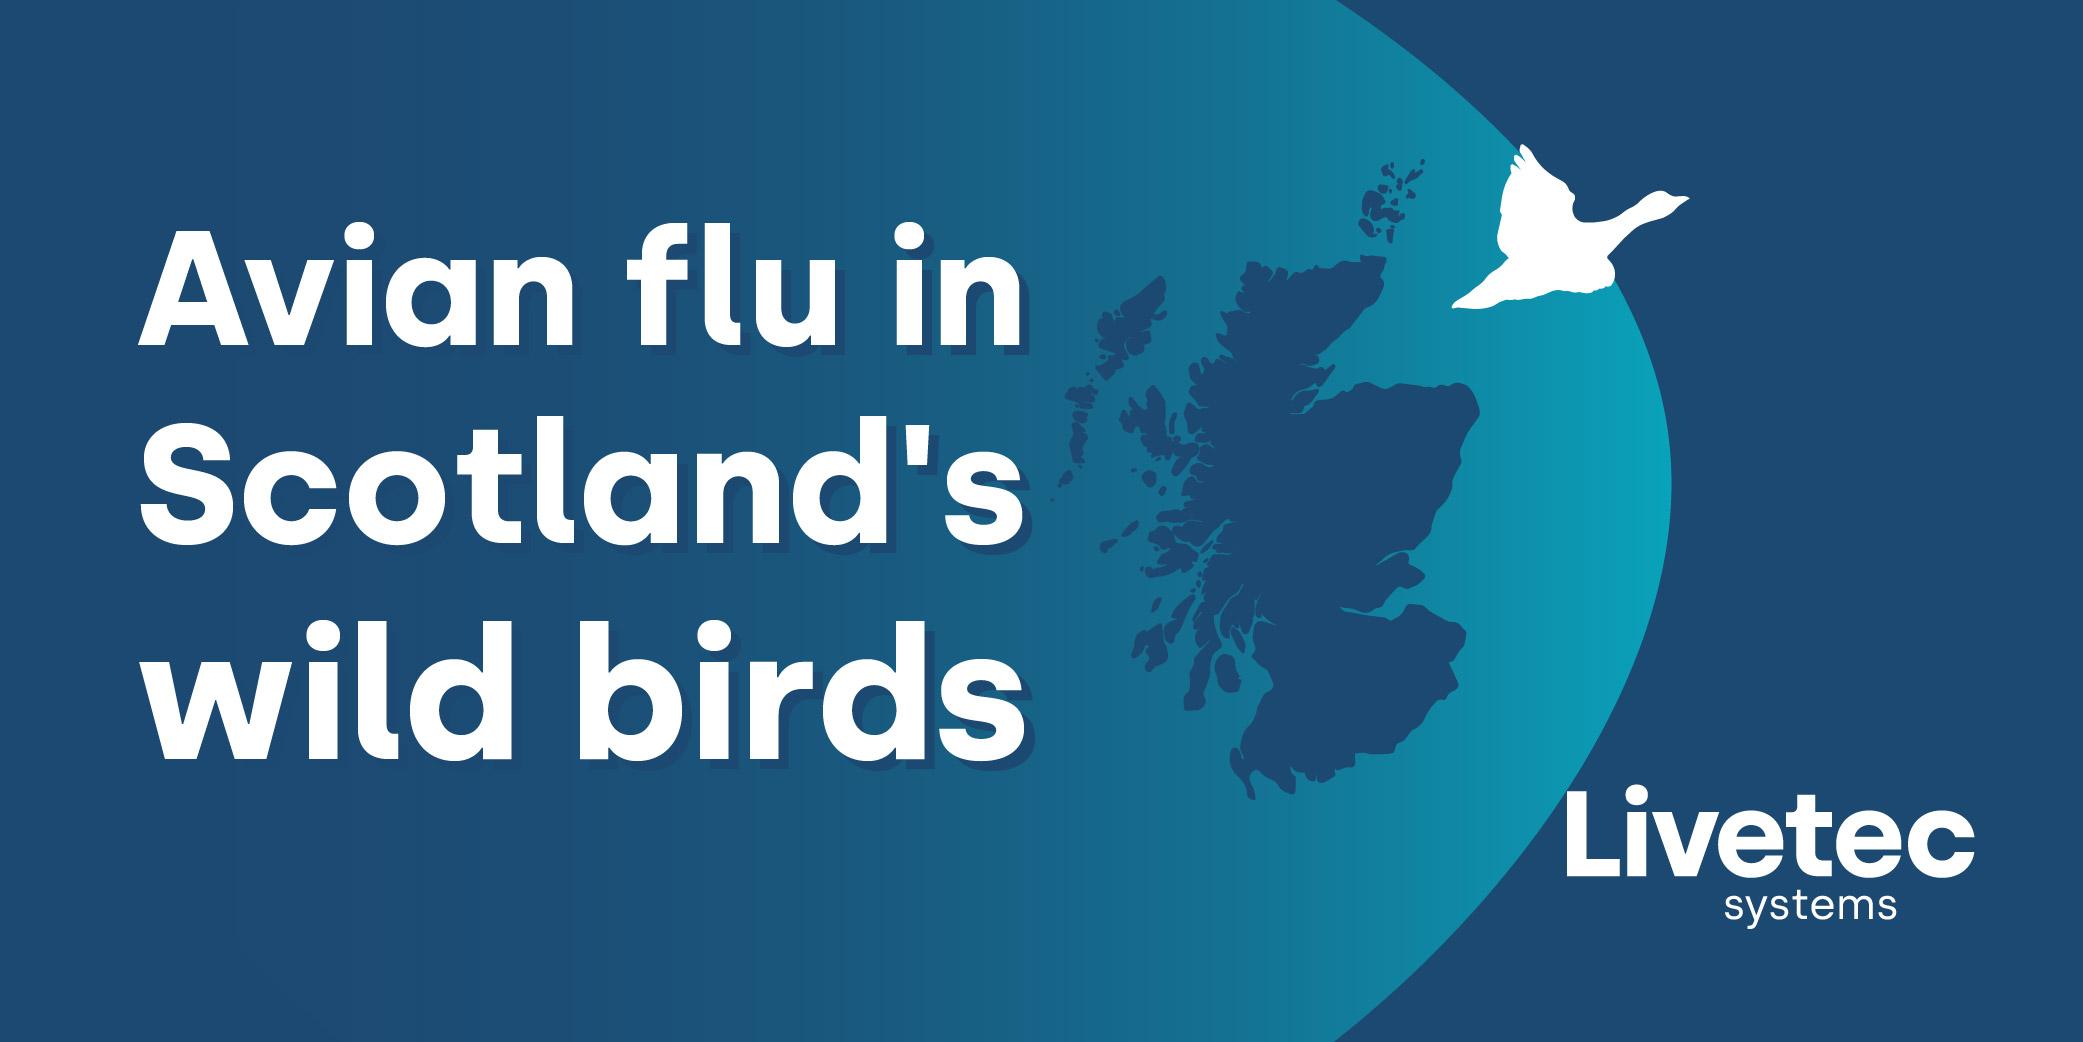 On 11th April 2023 NatureScot reported avian flu in wild birds in Scotland. The report details the impact of the disease as well as preventing the flu from spreading.